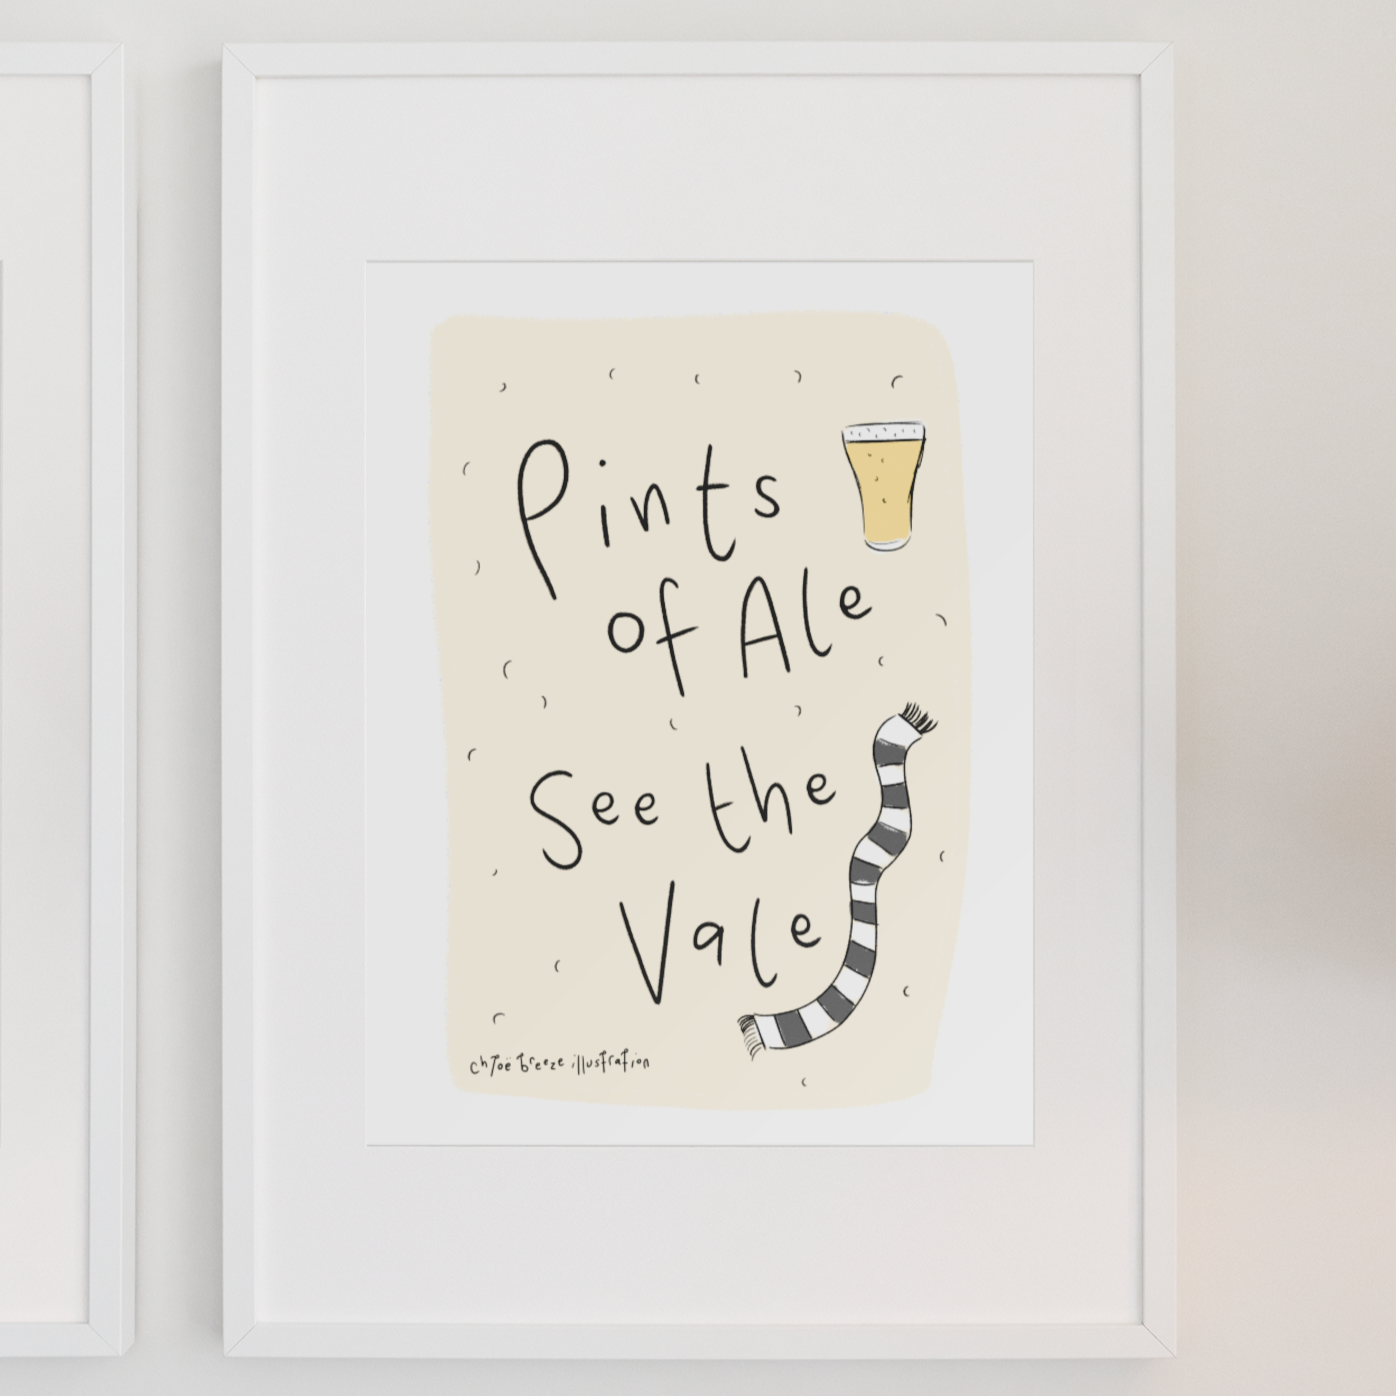 Ale and Vale - Port Vale Print